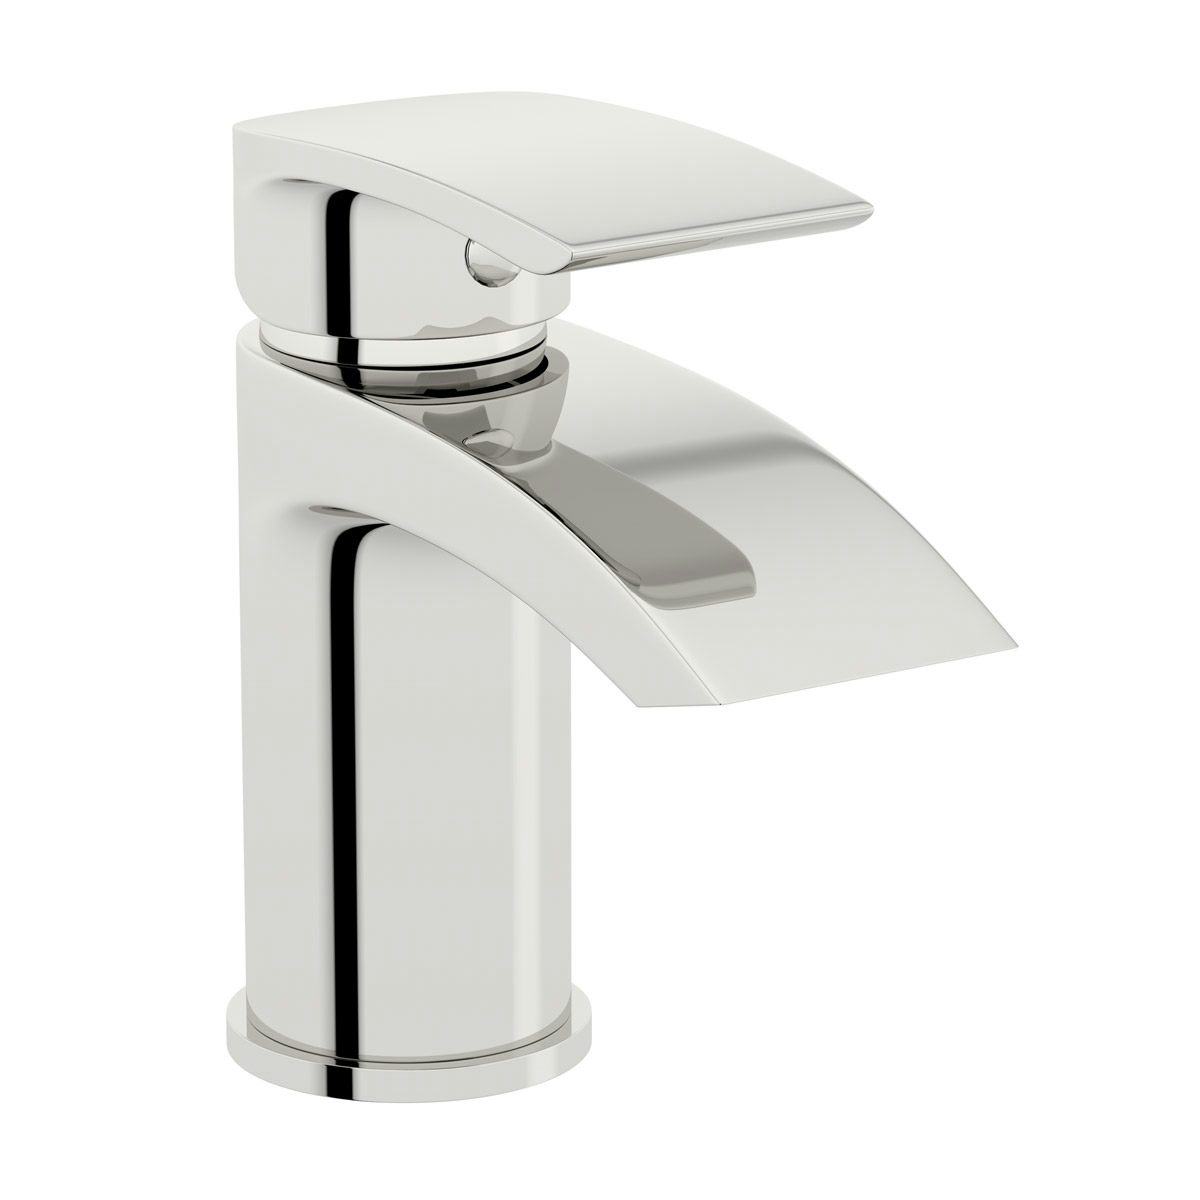 Orchard Wye round cloakroom basin mixer tap with unslotted waste